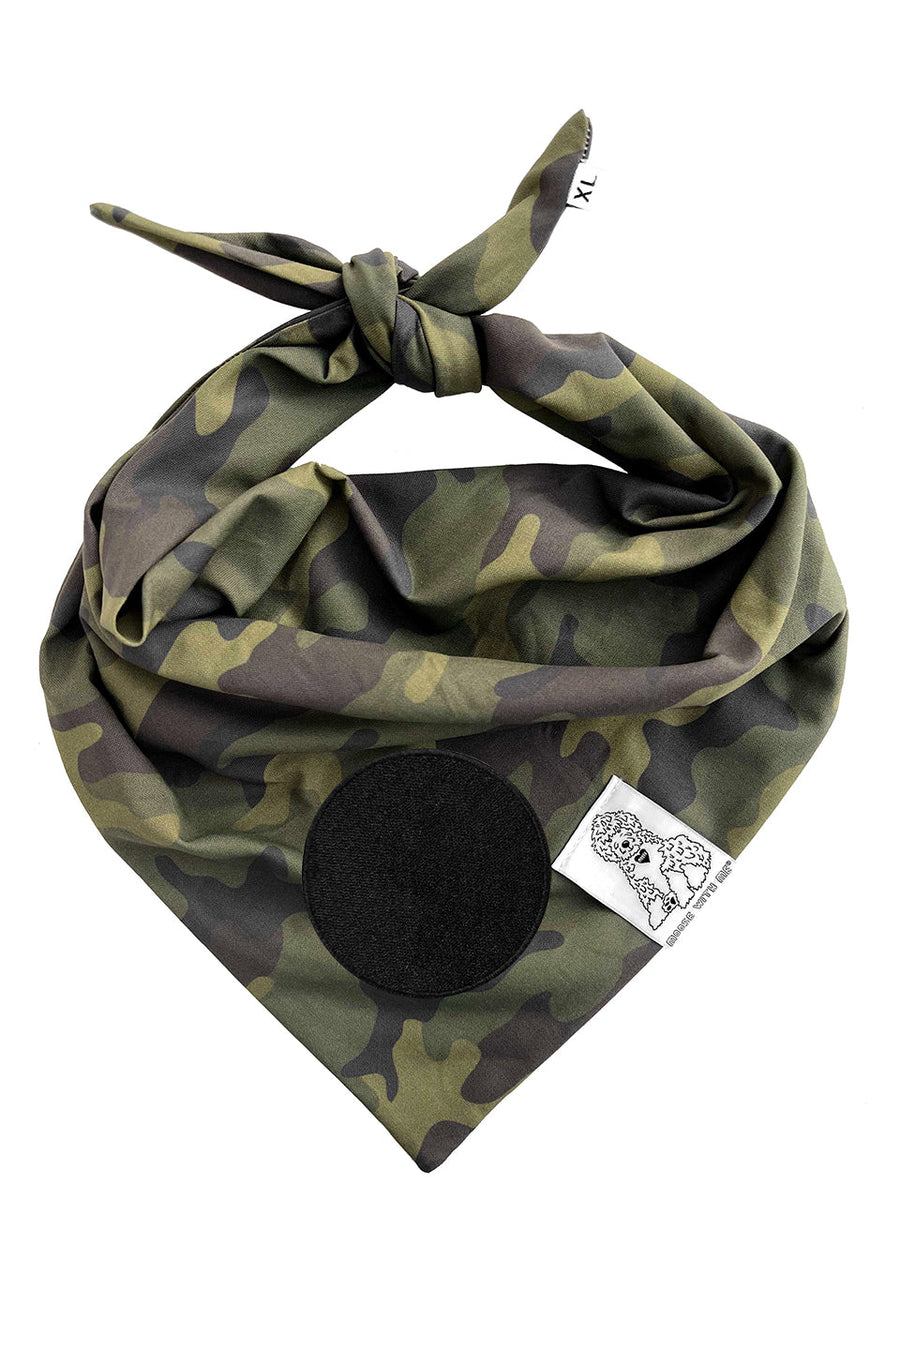 Dog Bandana Camouflage - Customize with Interchangeable Velcro Patches